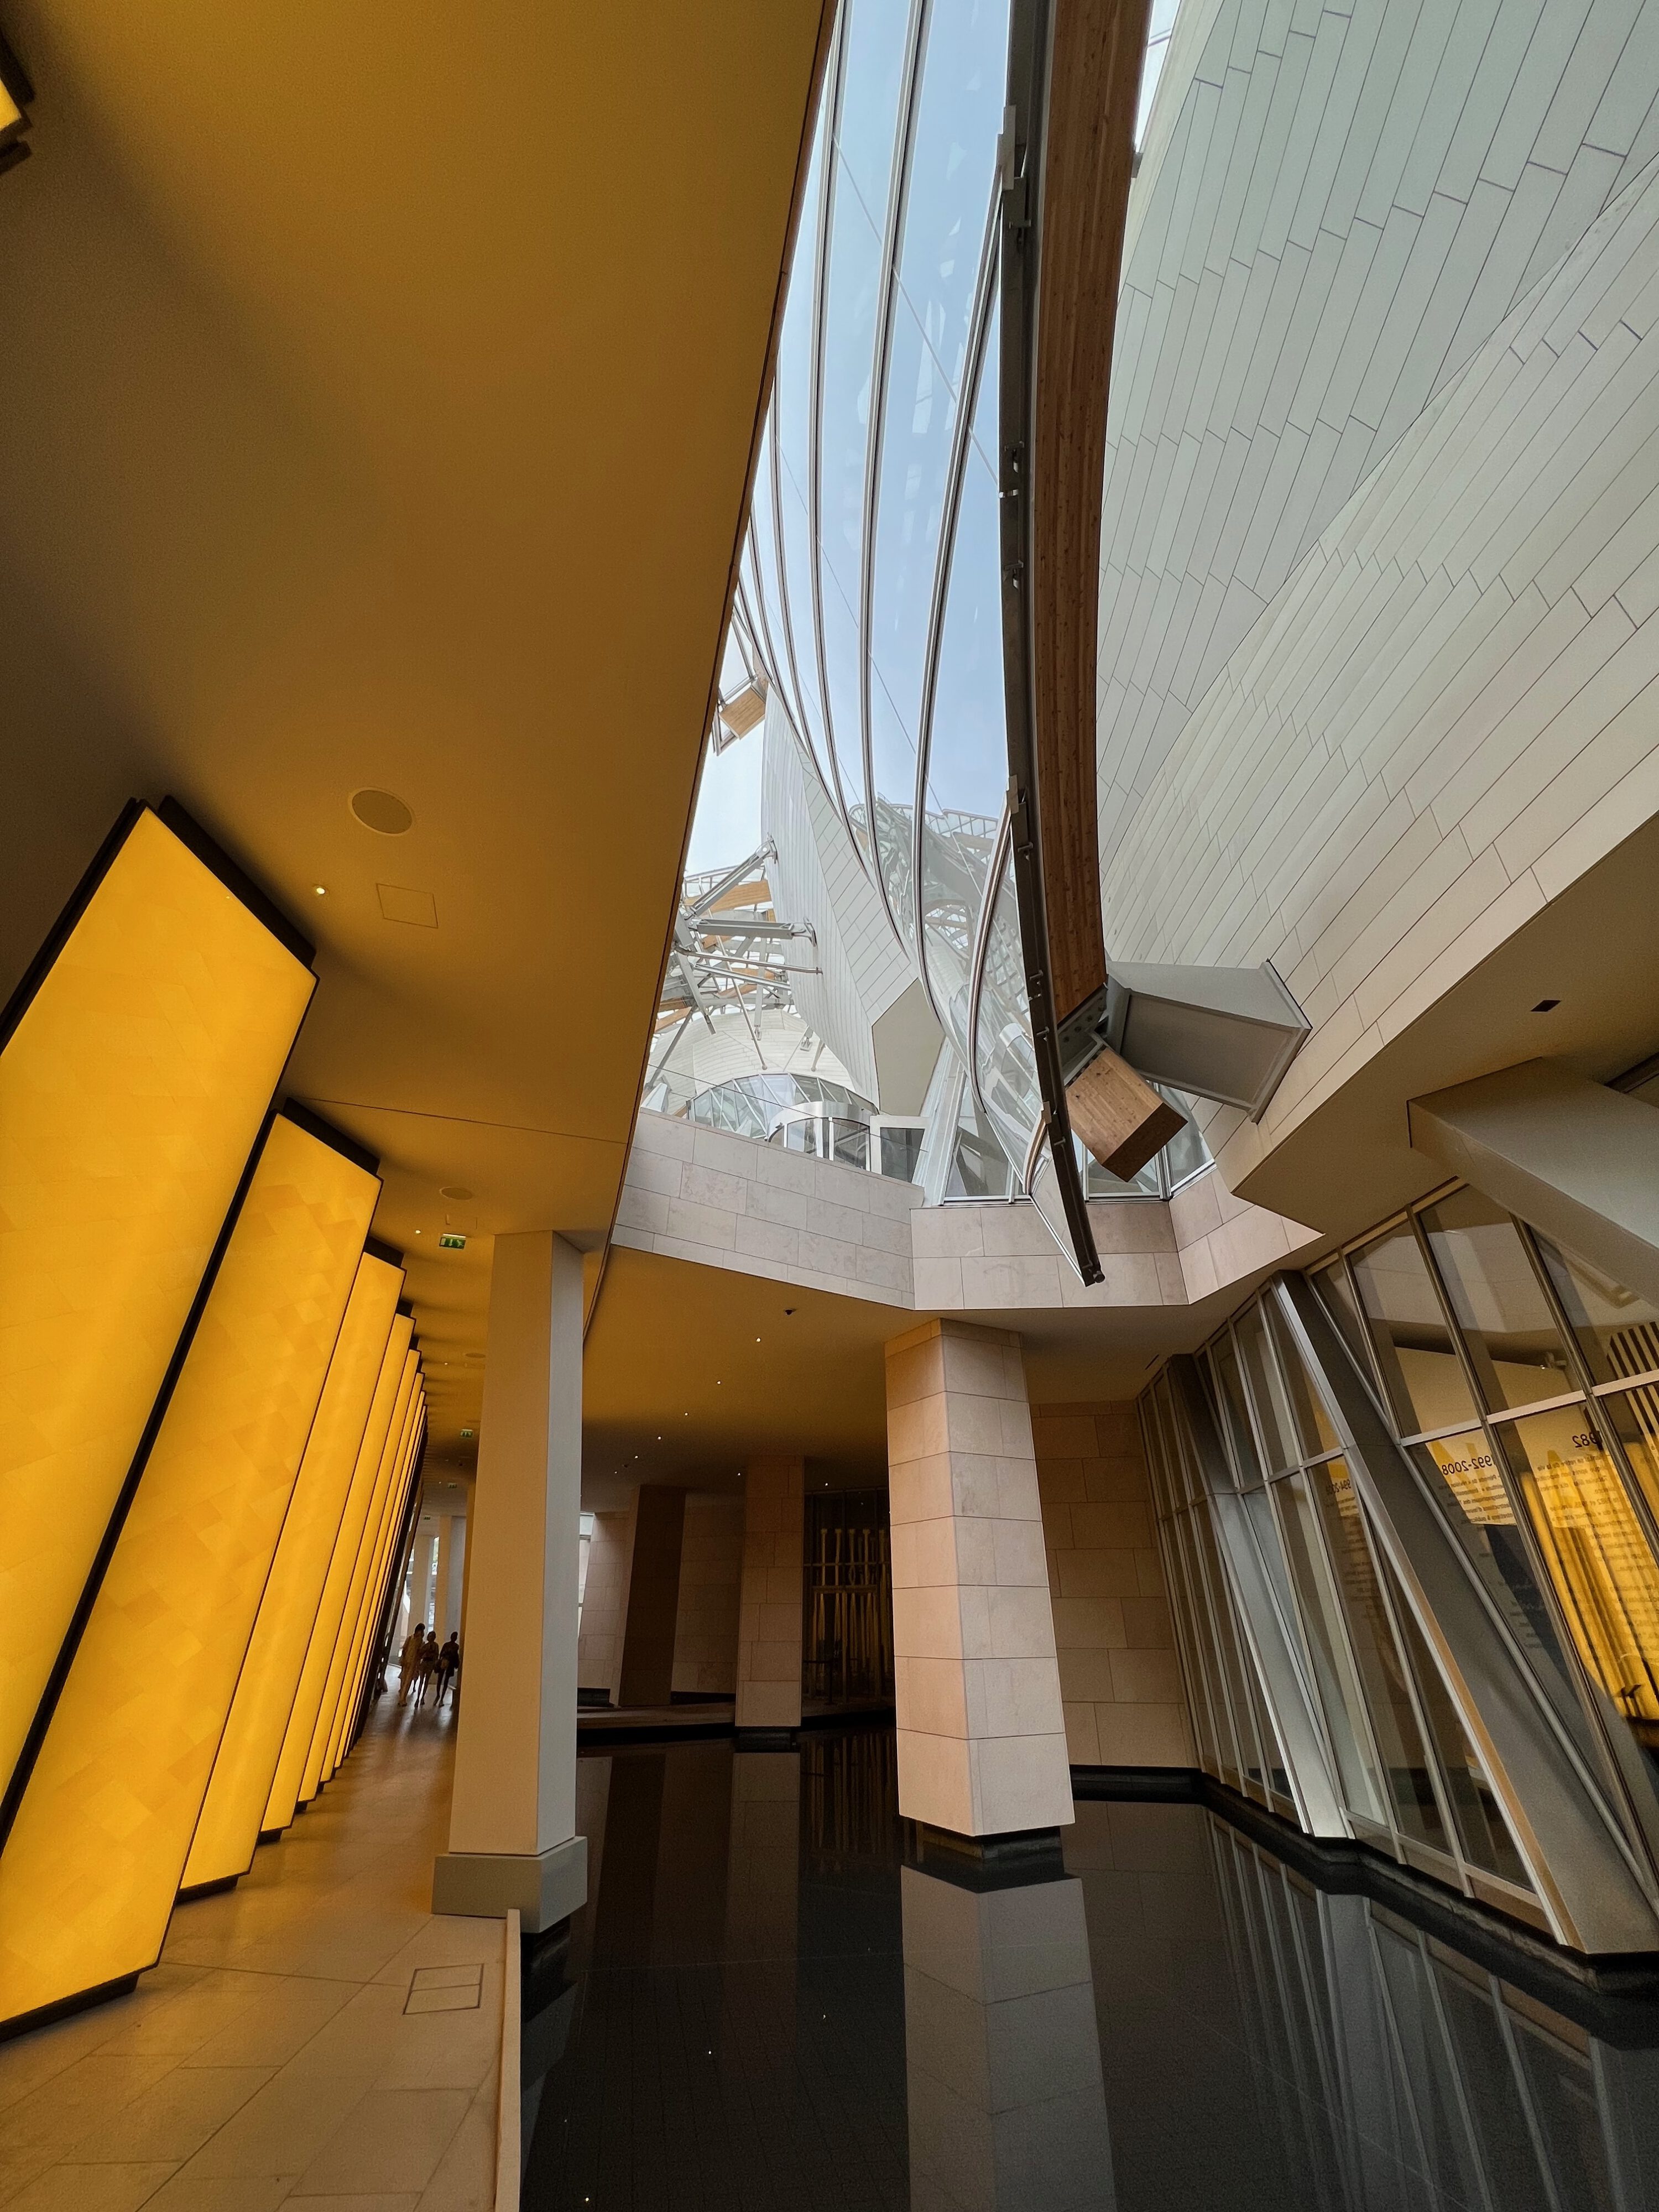 Inside the horizon, Olafur Eliassons permanent installation at the Frank Gehry–designed Fondation Louis Vuitton in Paris